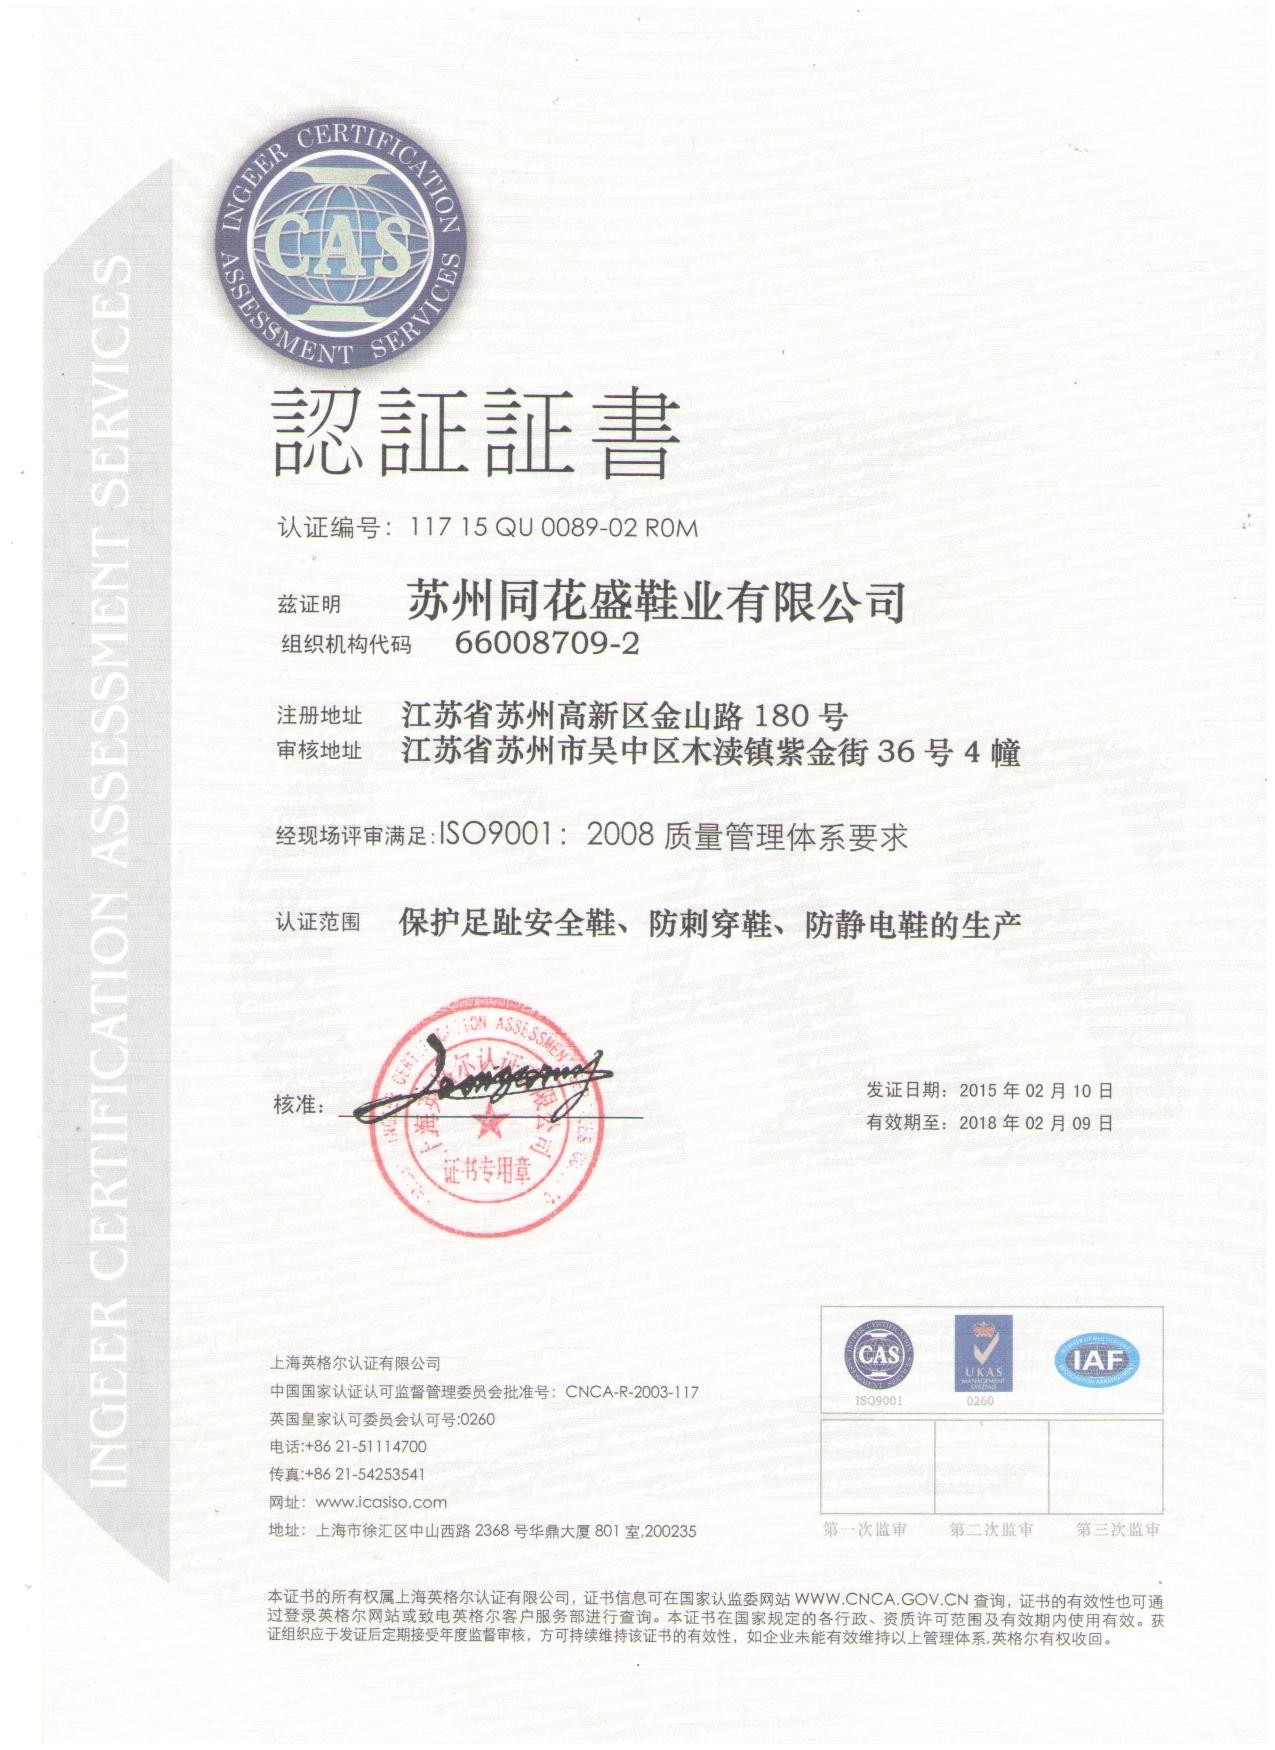 Shenzhen Haoyatong Protective Supplies Co., Ltd. Certifications